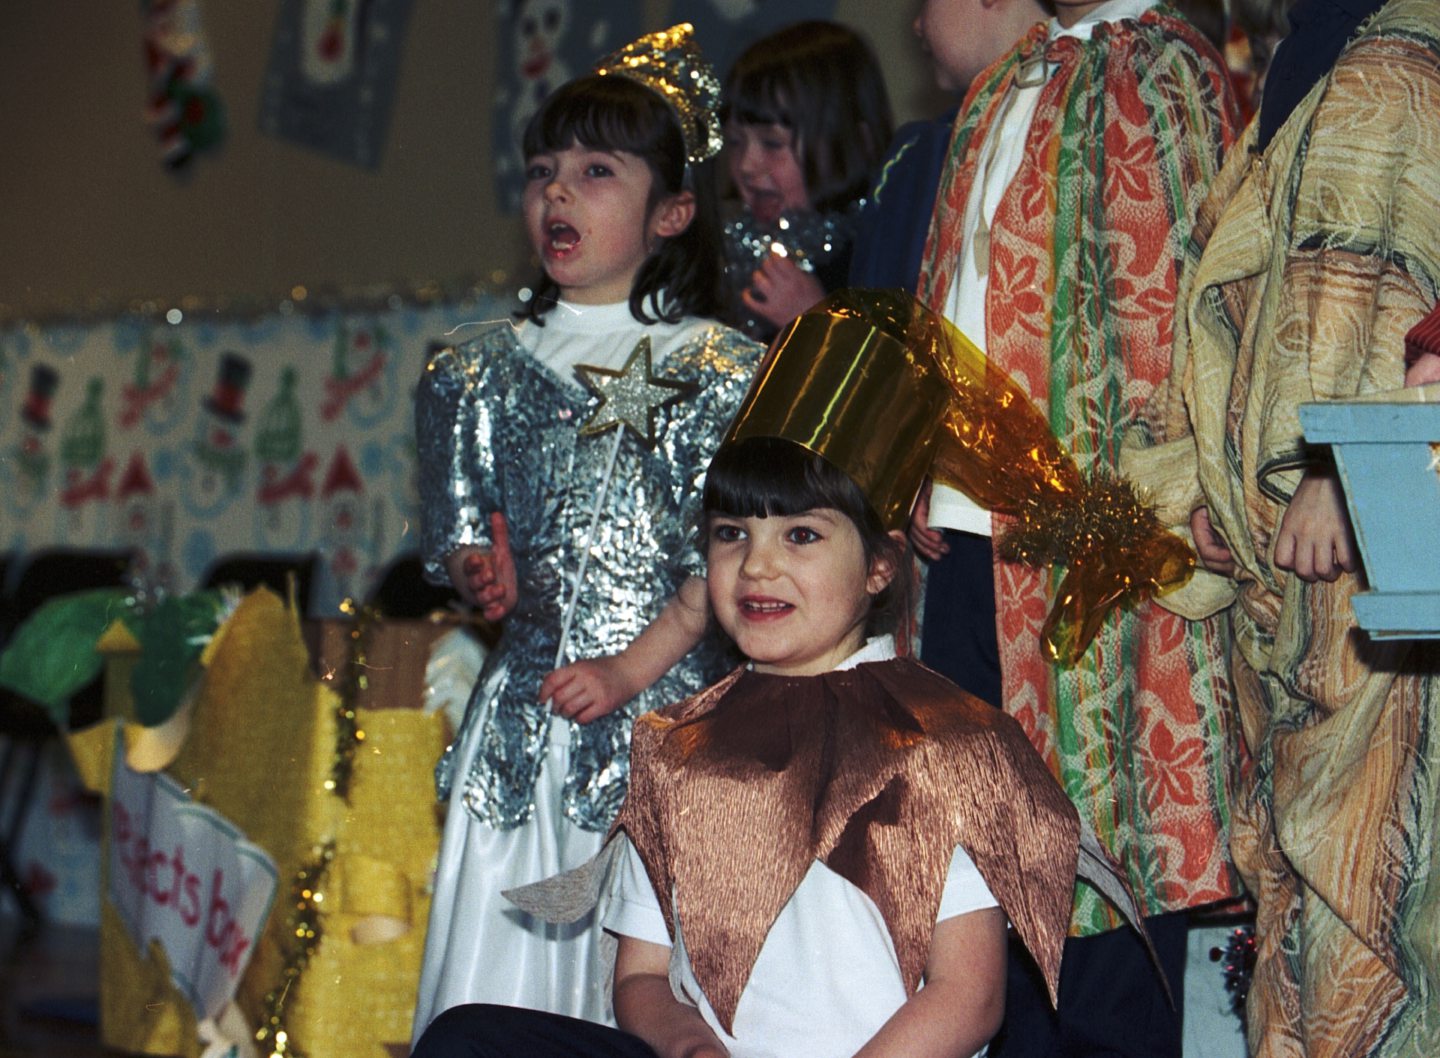 Youngsters perform in the school's nativity play in 1999.